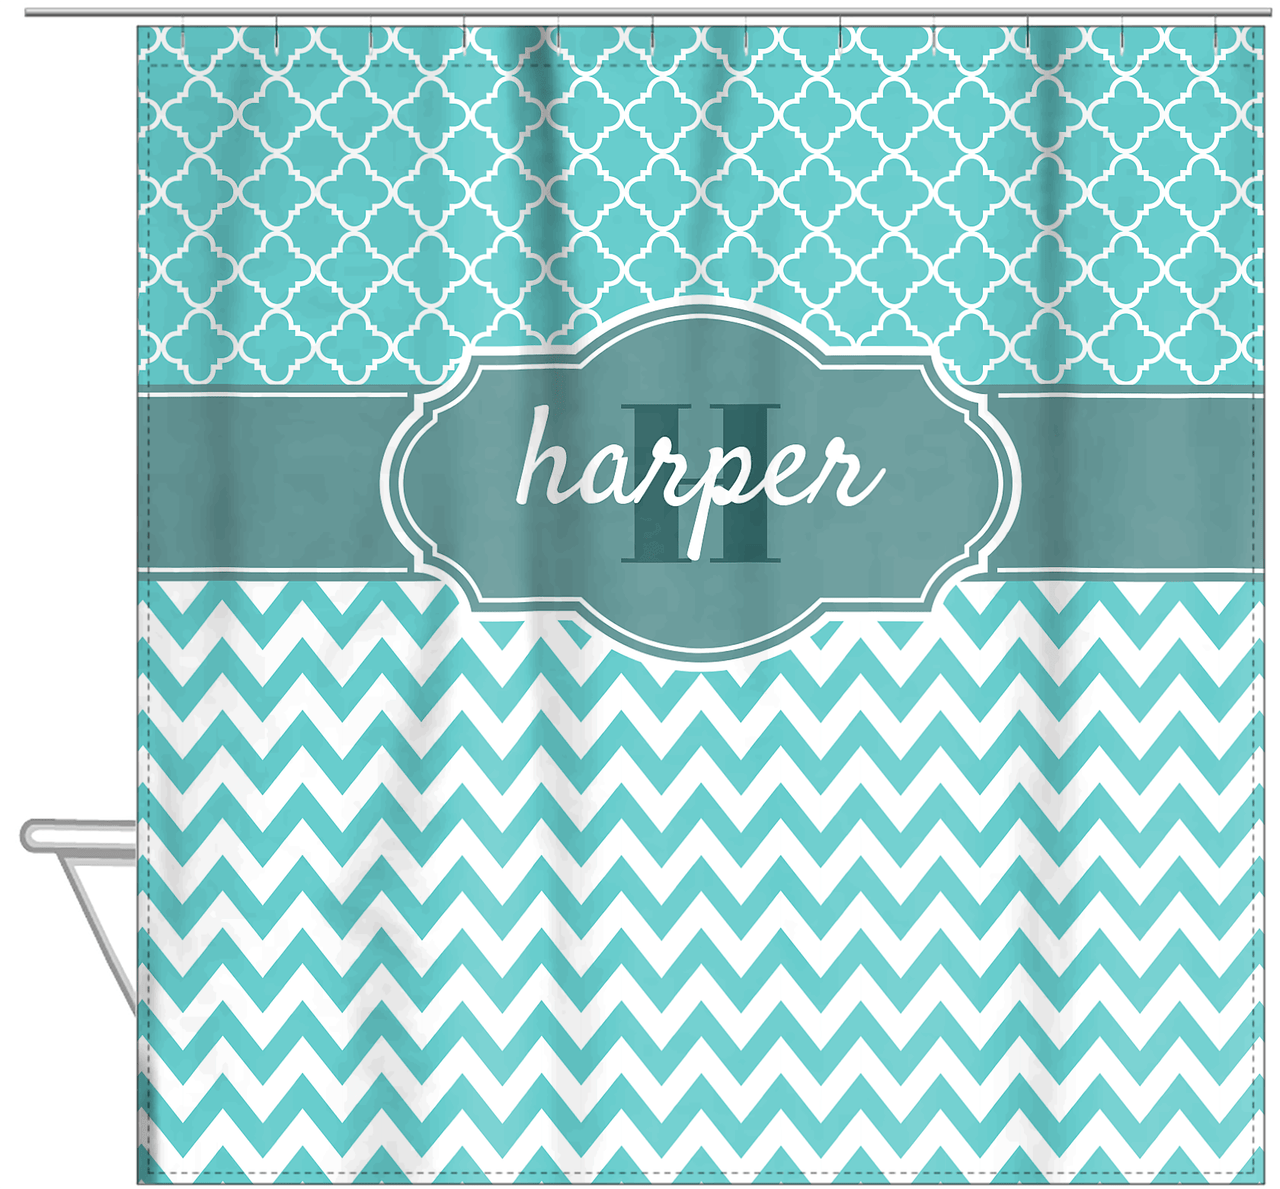 Personalized Quatrefoil and Chevron I Shower Curtain - Teal and White - Fancy Nameplate - Hanging View